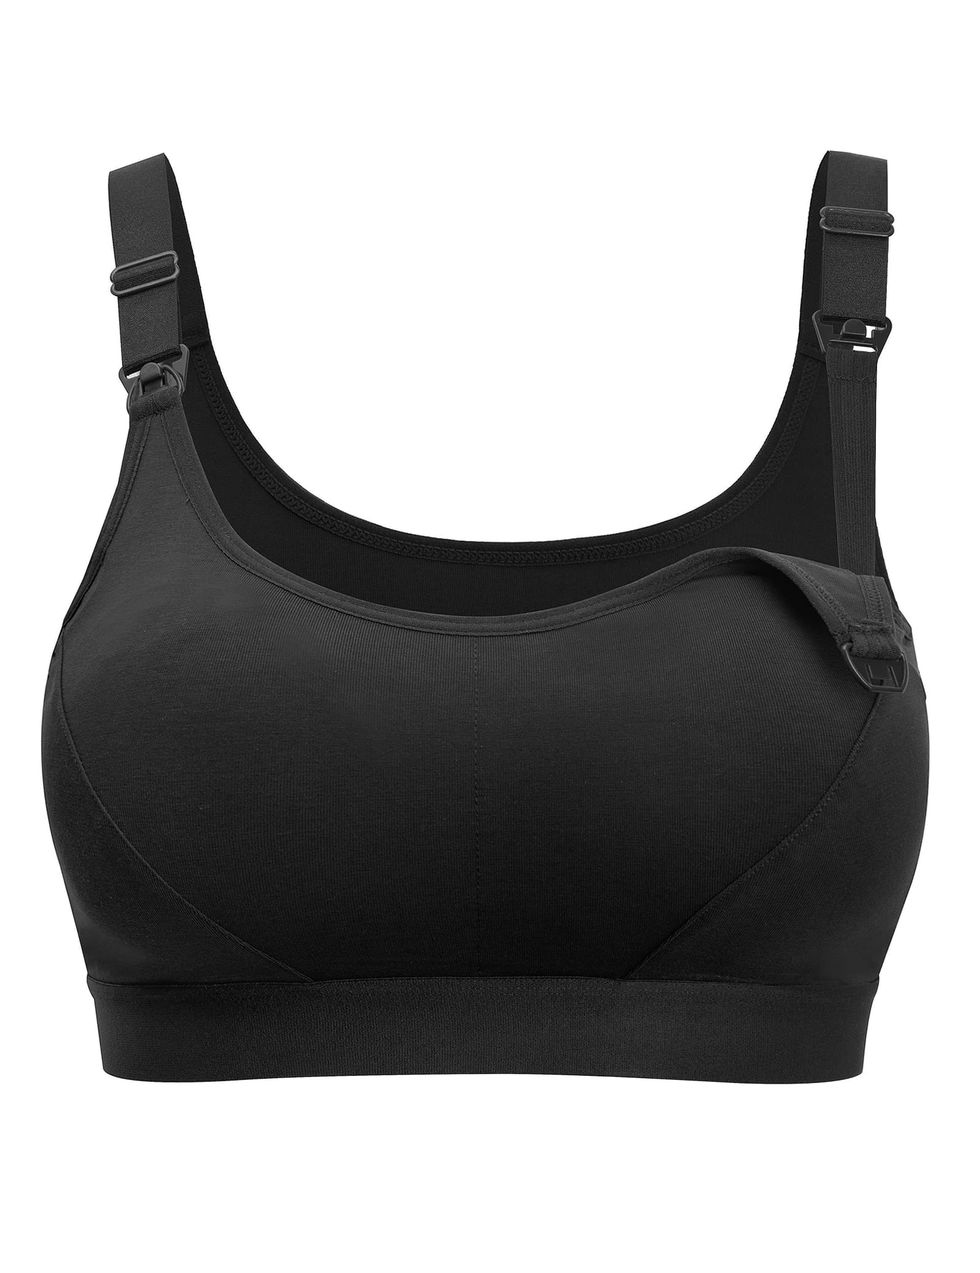 36H Nursing Bra Non Racerback Sports Bra Best Everyday Sports Bra  Affordable Bras For Small Bust Best Compression Bras Labor Nightgown  Crossover Sports Bra Half Size Bras Best Plus Size Bralette 